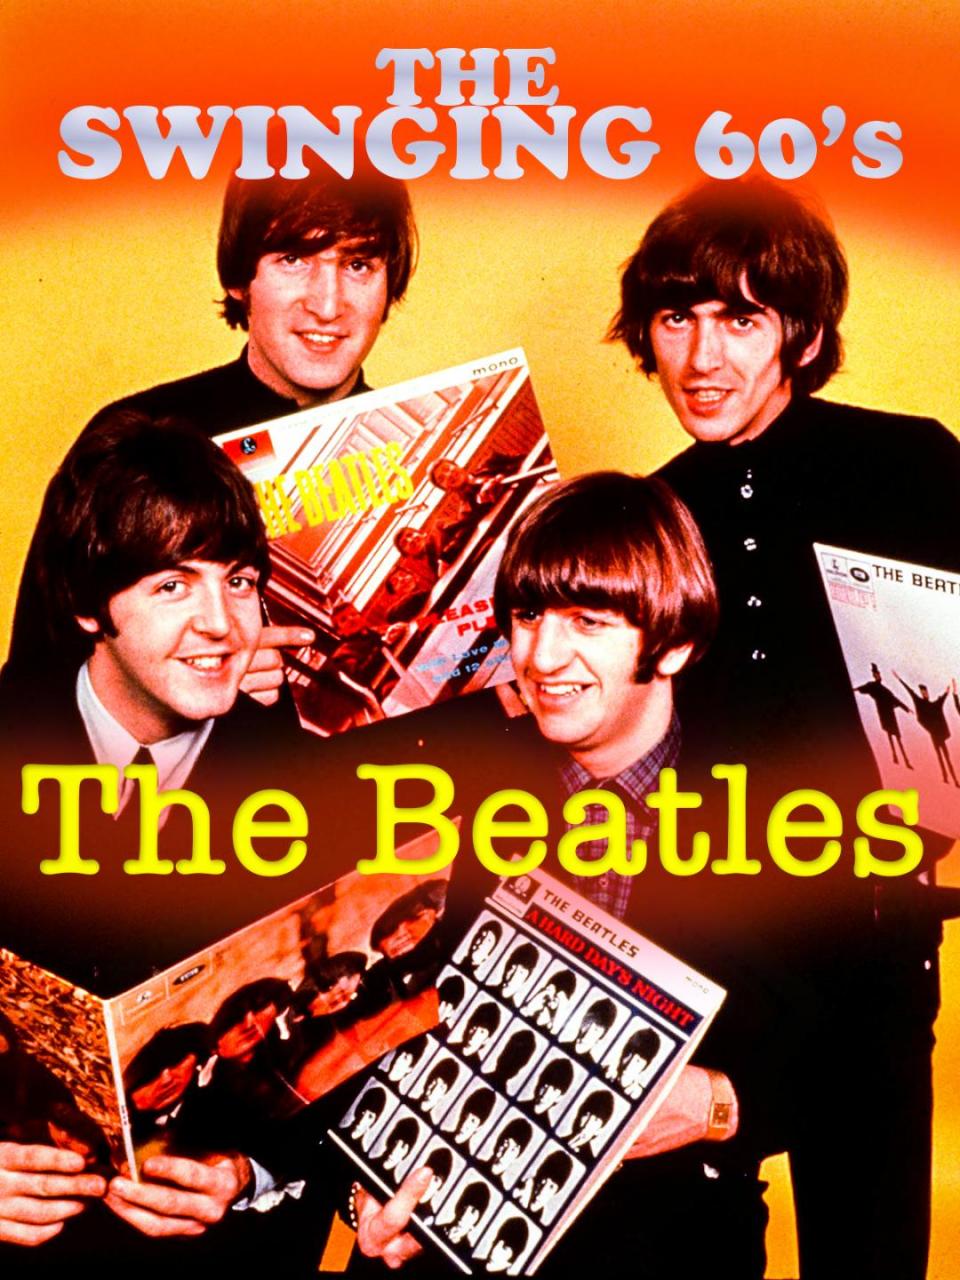 The Swinging 60's -The Beatles